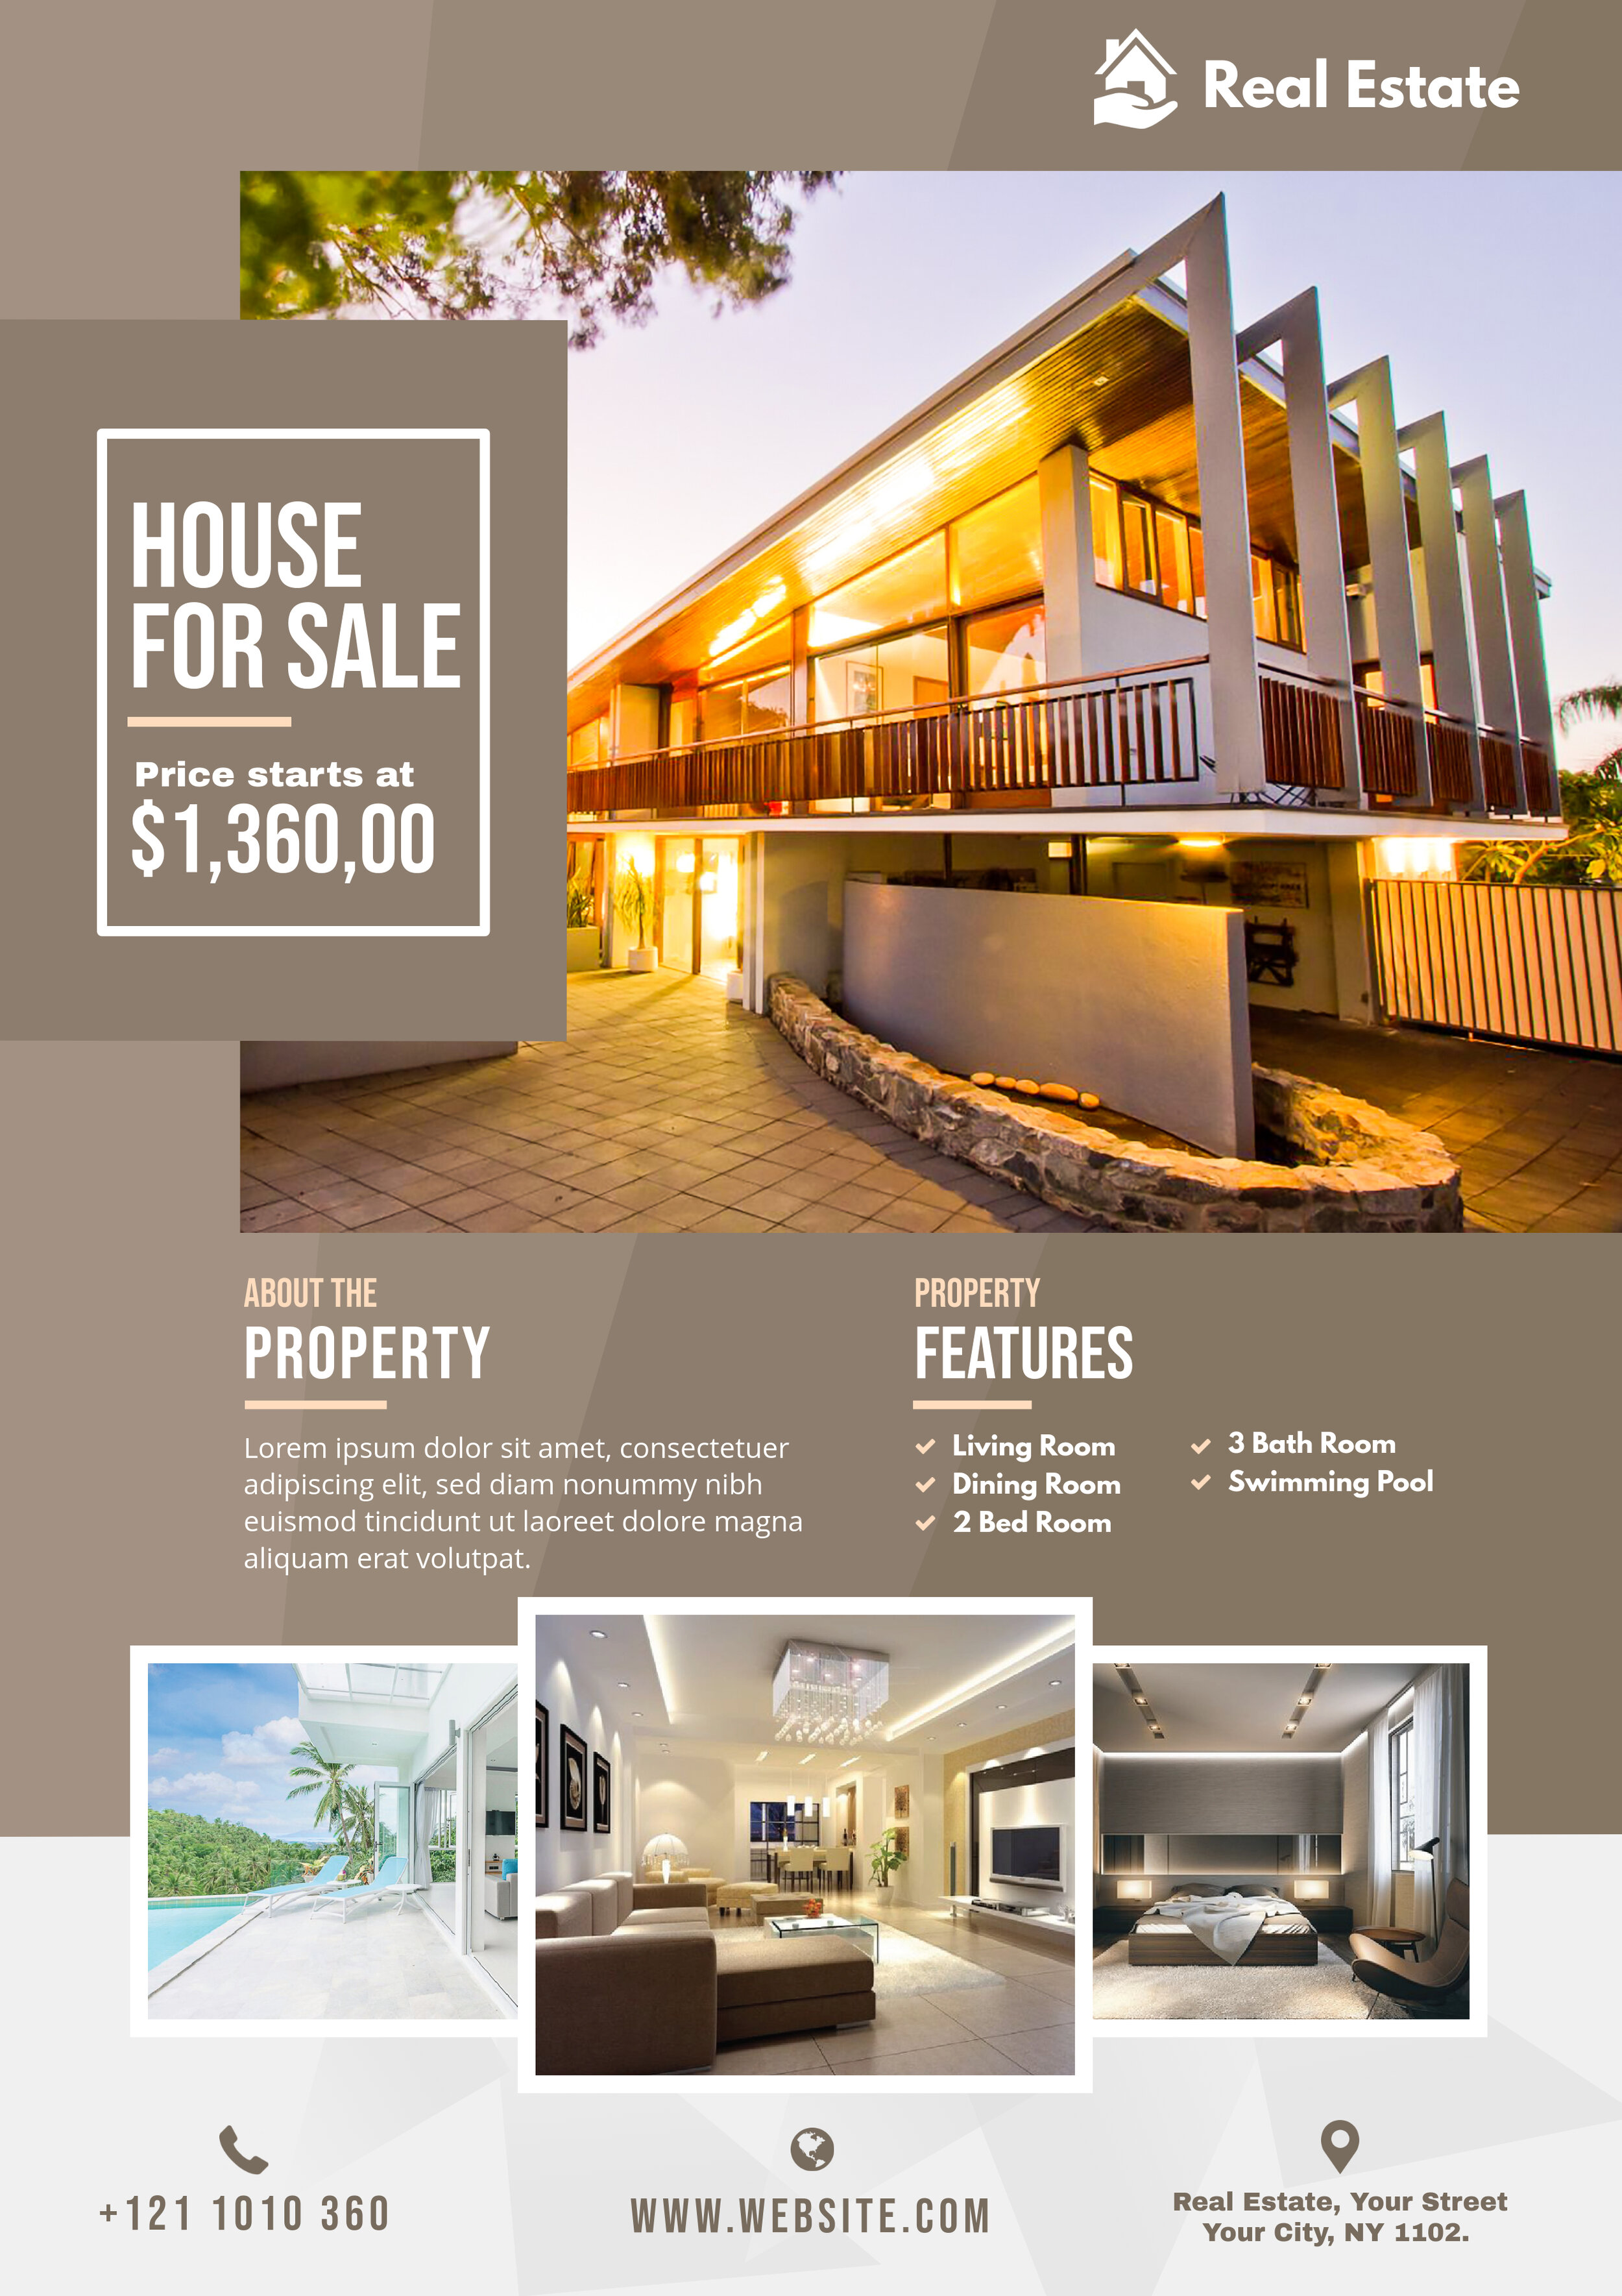 House for Sale Flyer